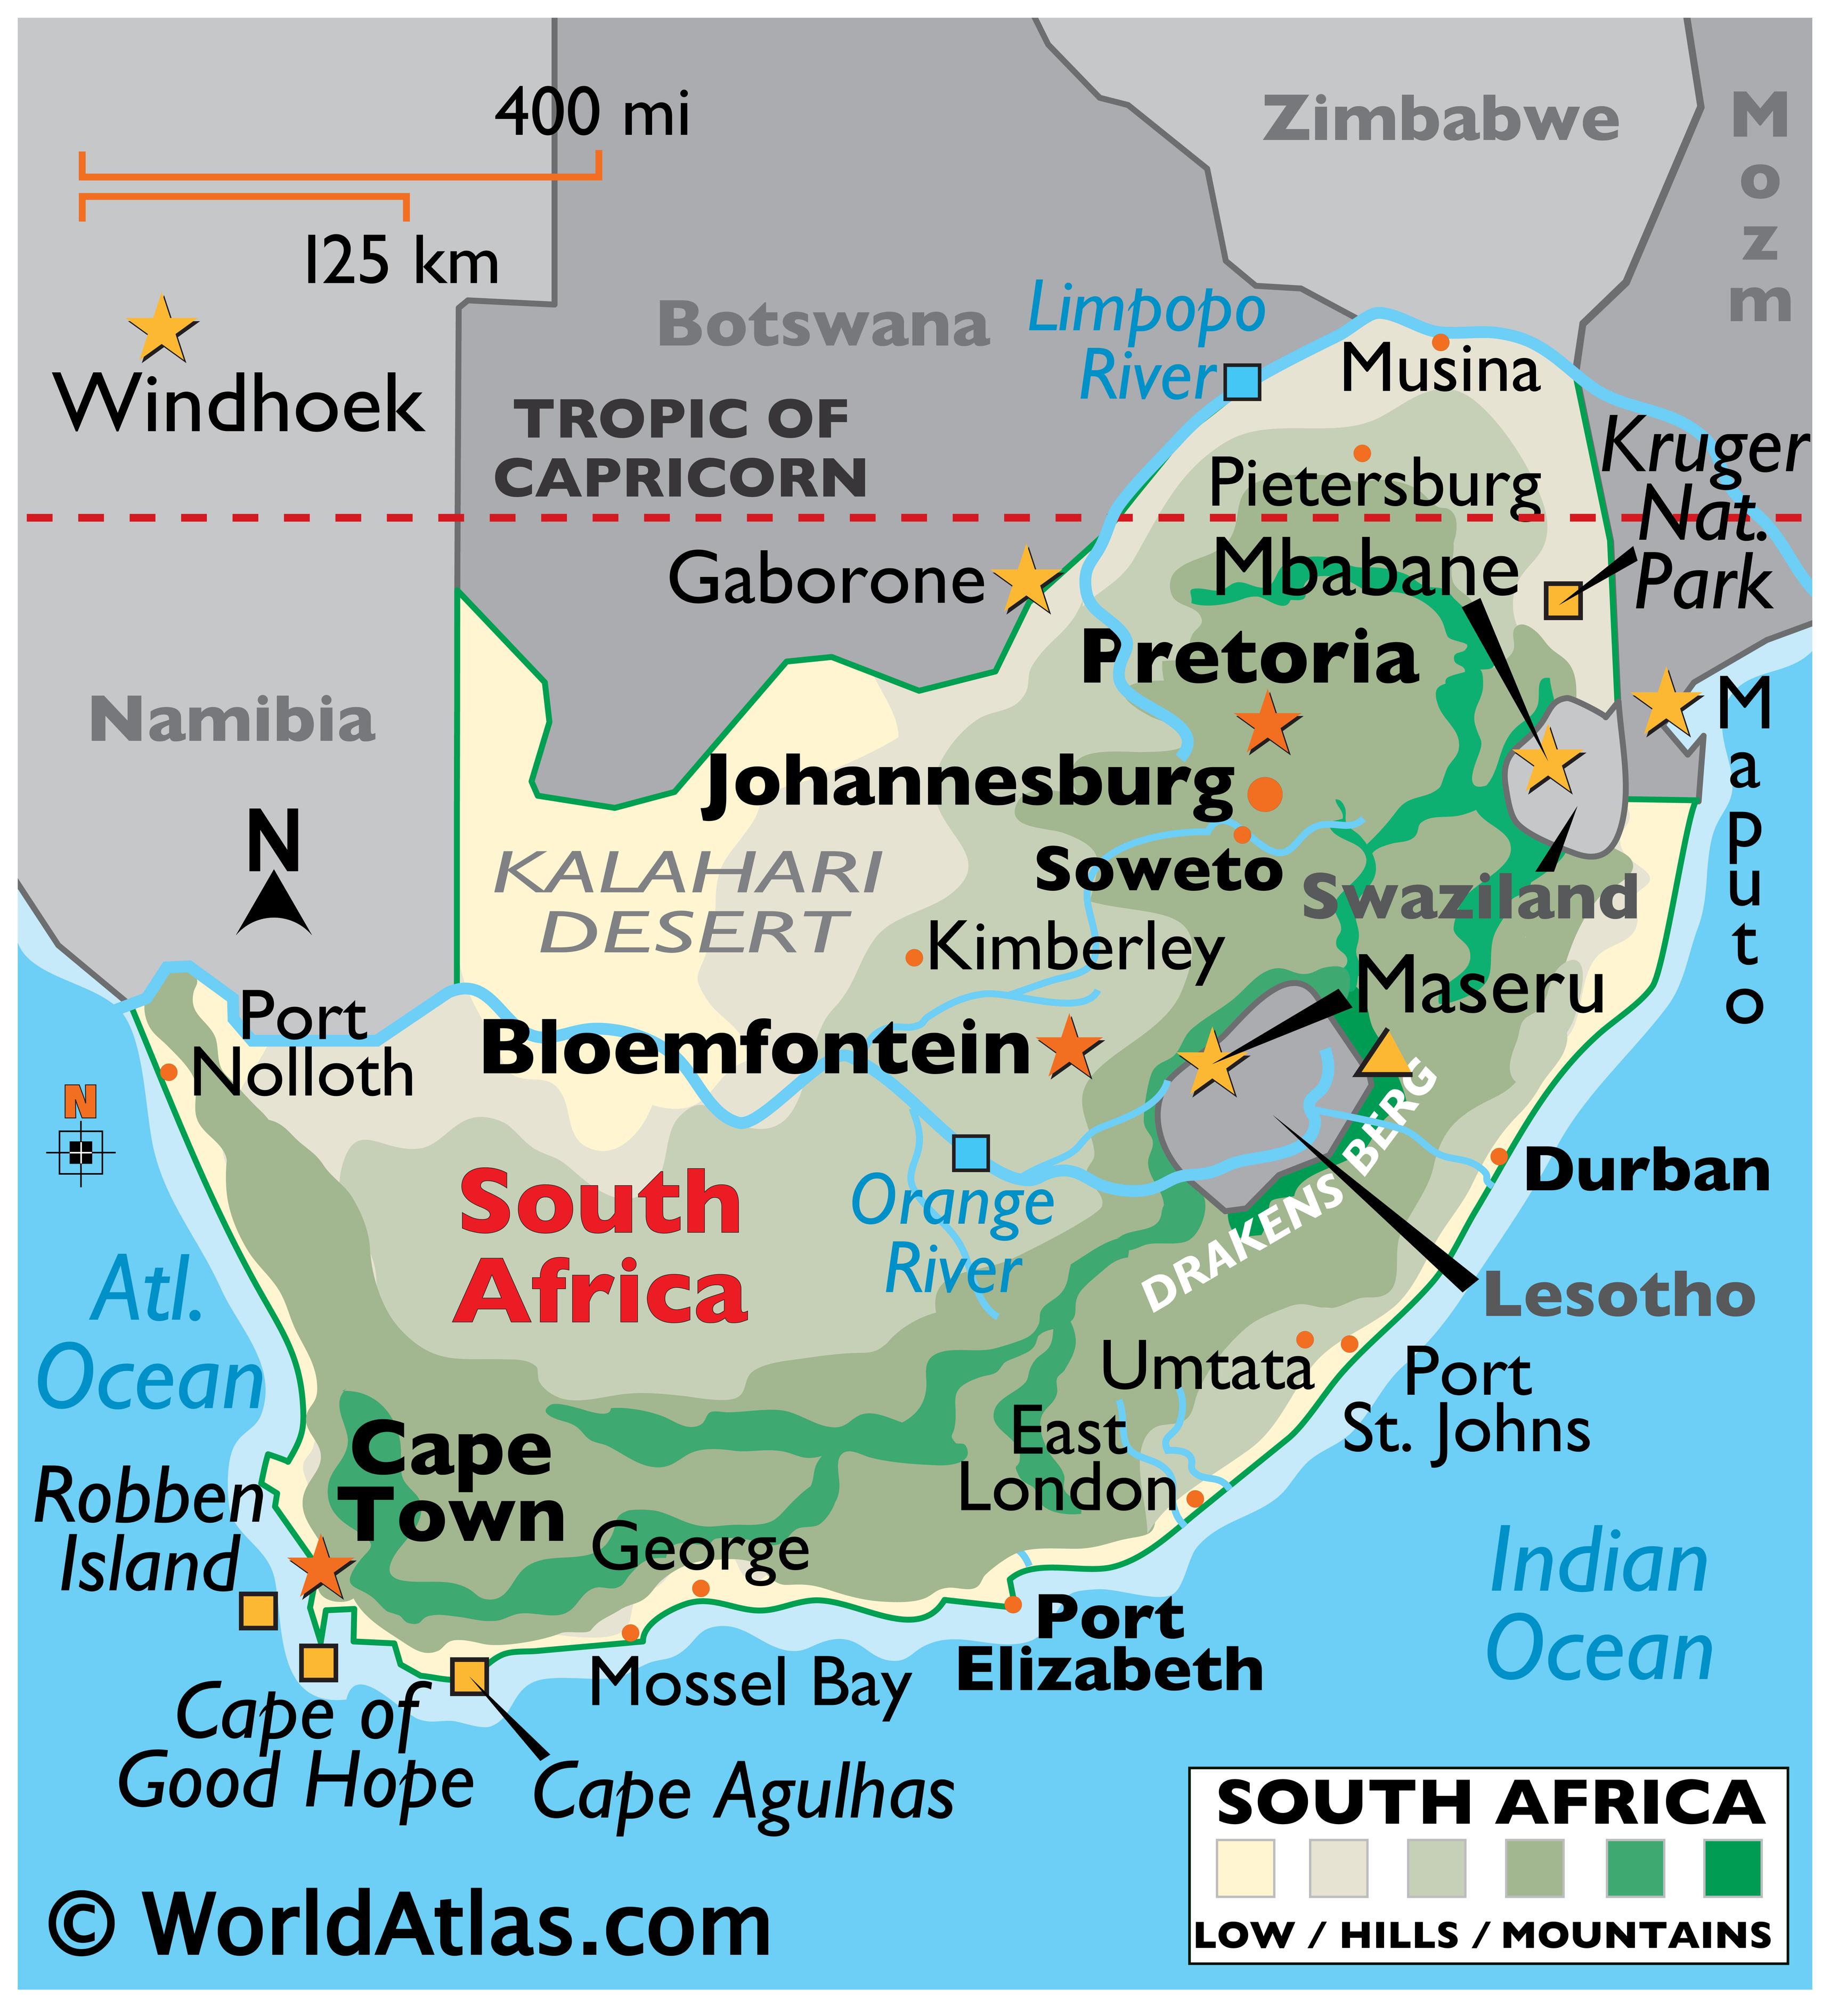 South Africa Map / Geography of South Africa / Map of South Africa